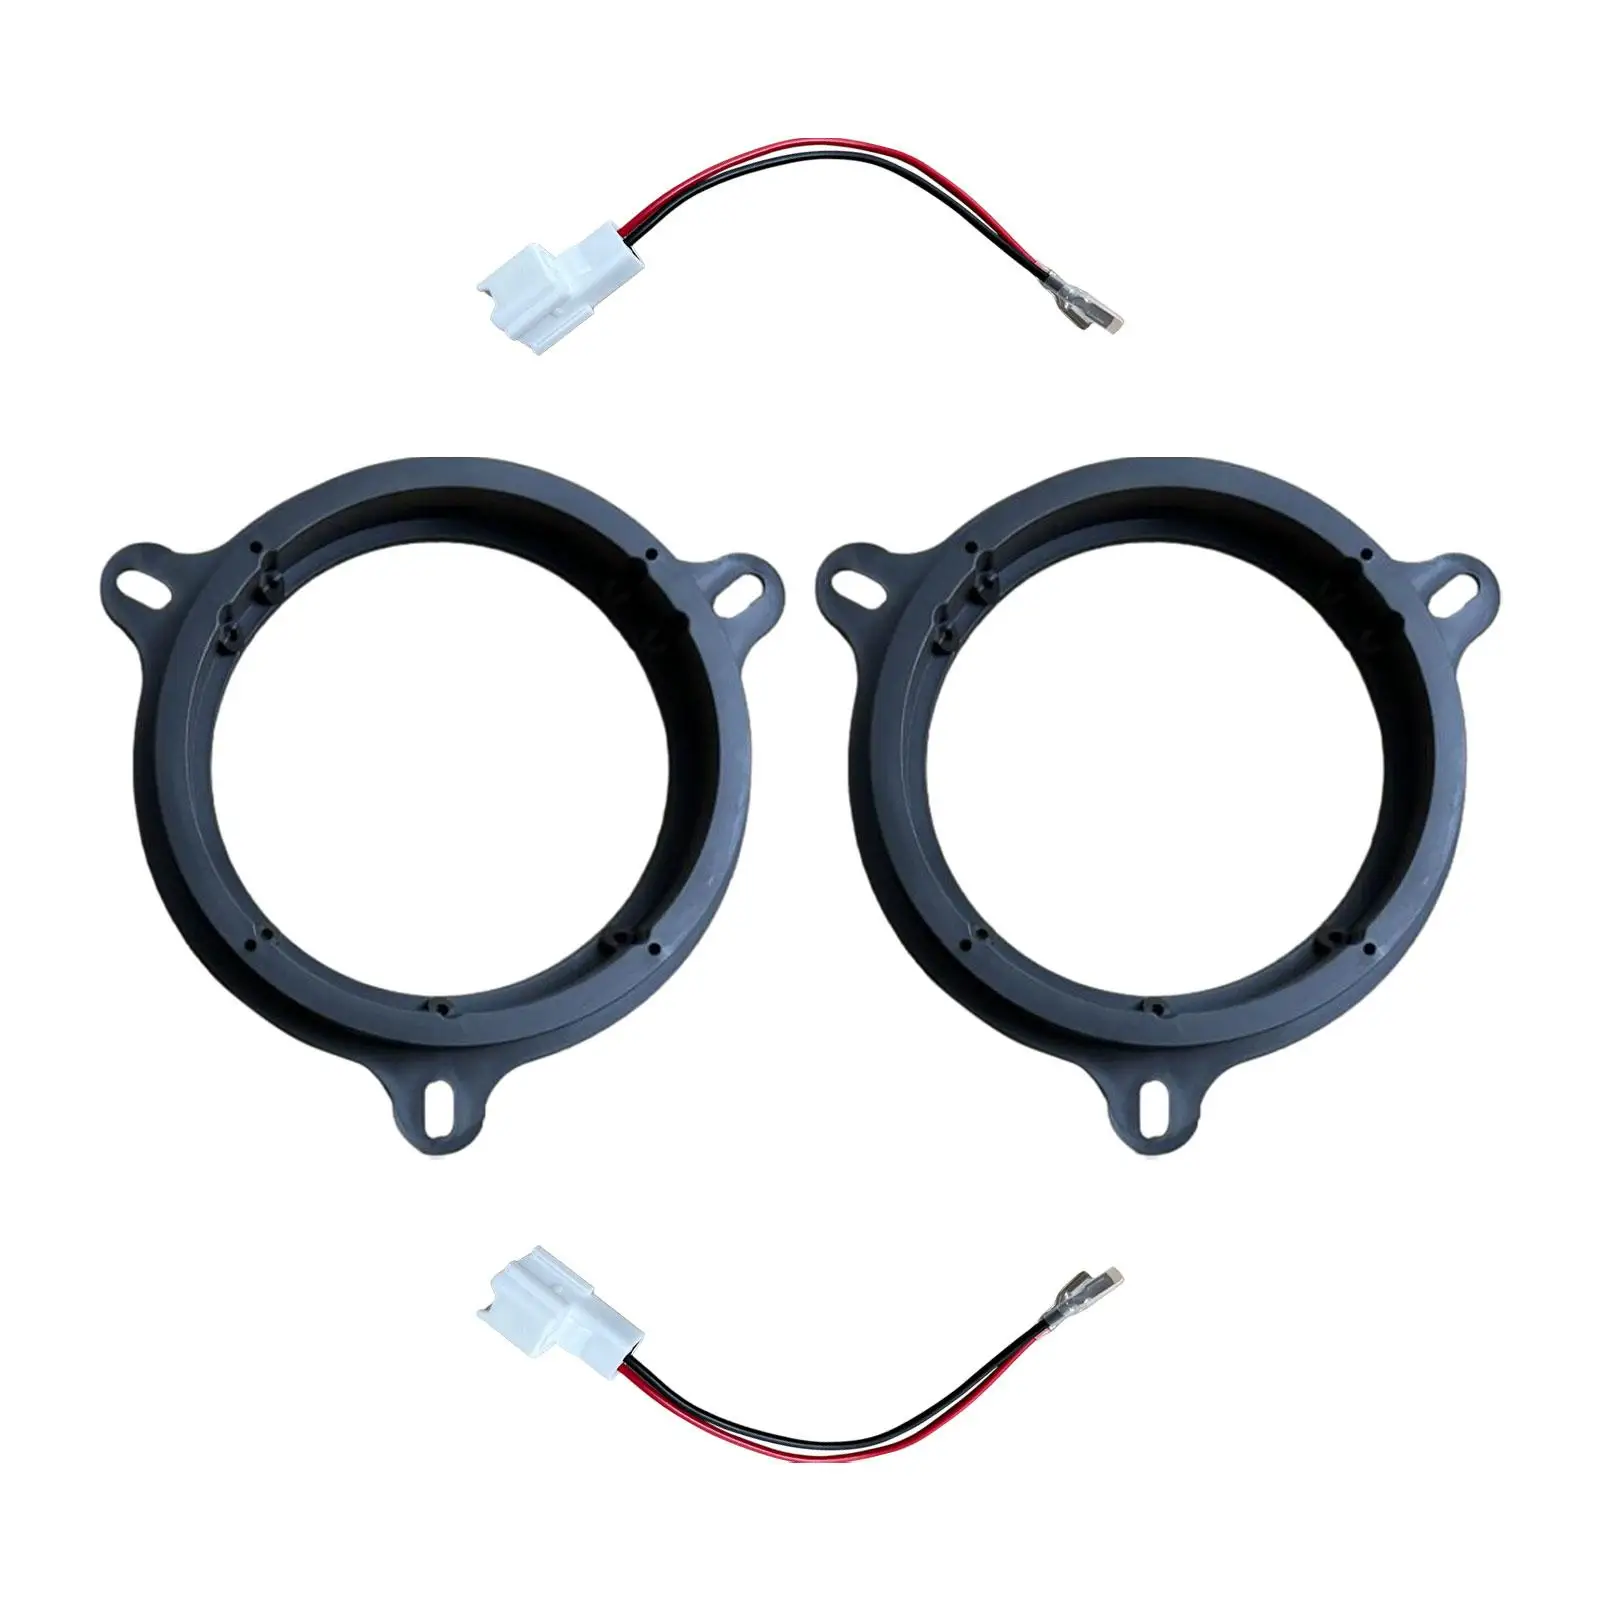 Wiring Harness Set Shims Mounting Vehicles Gasket Car Speaker Spacer Multi Functional Universal Adapter Accessories